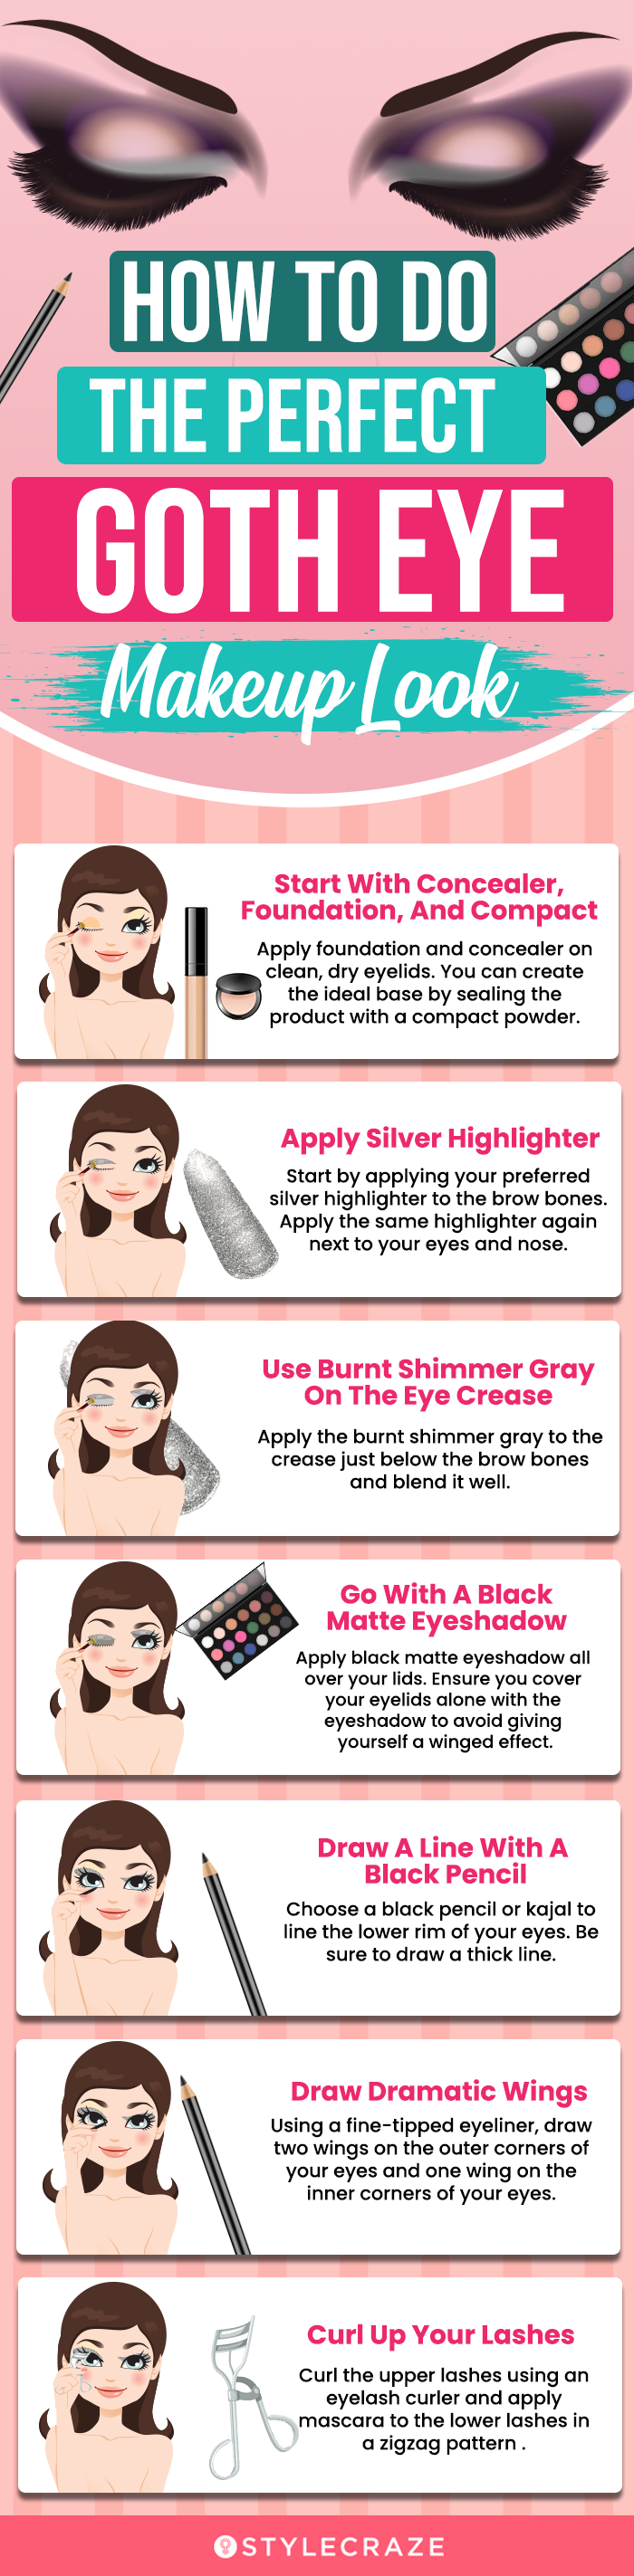 how to create the goth eye makeup look (infographic)